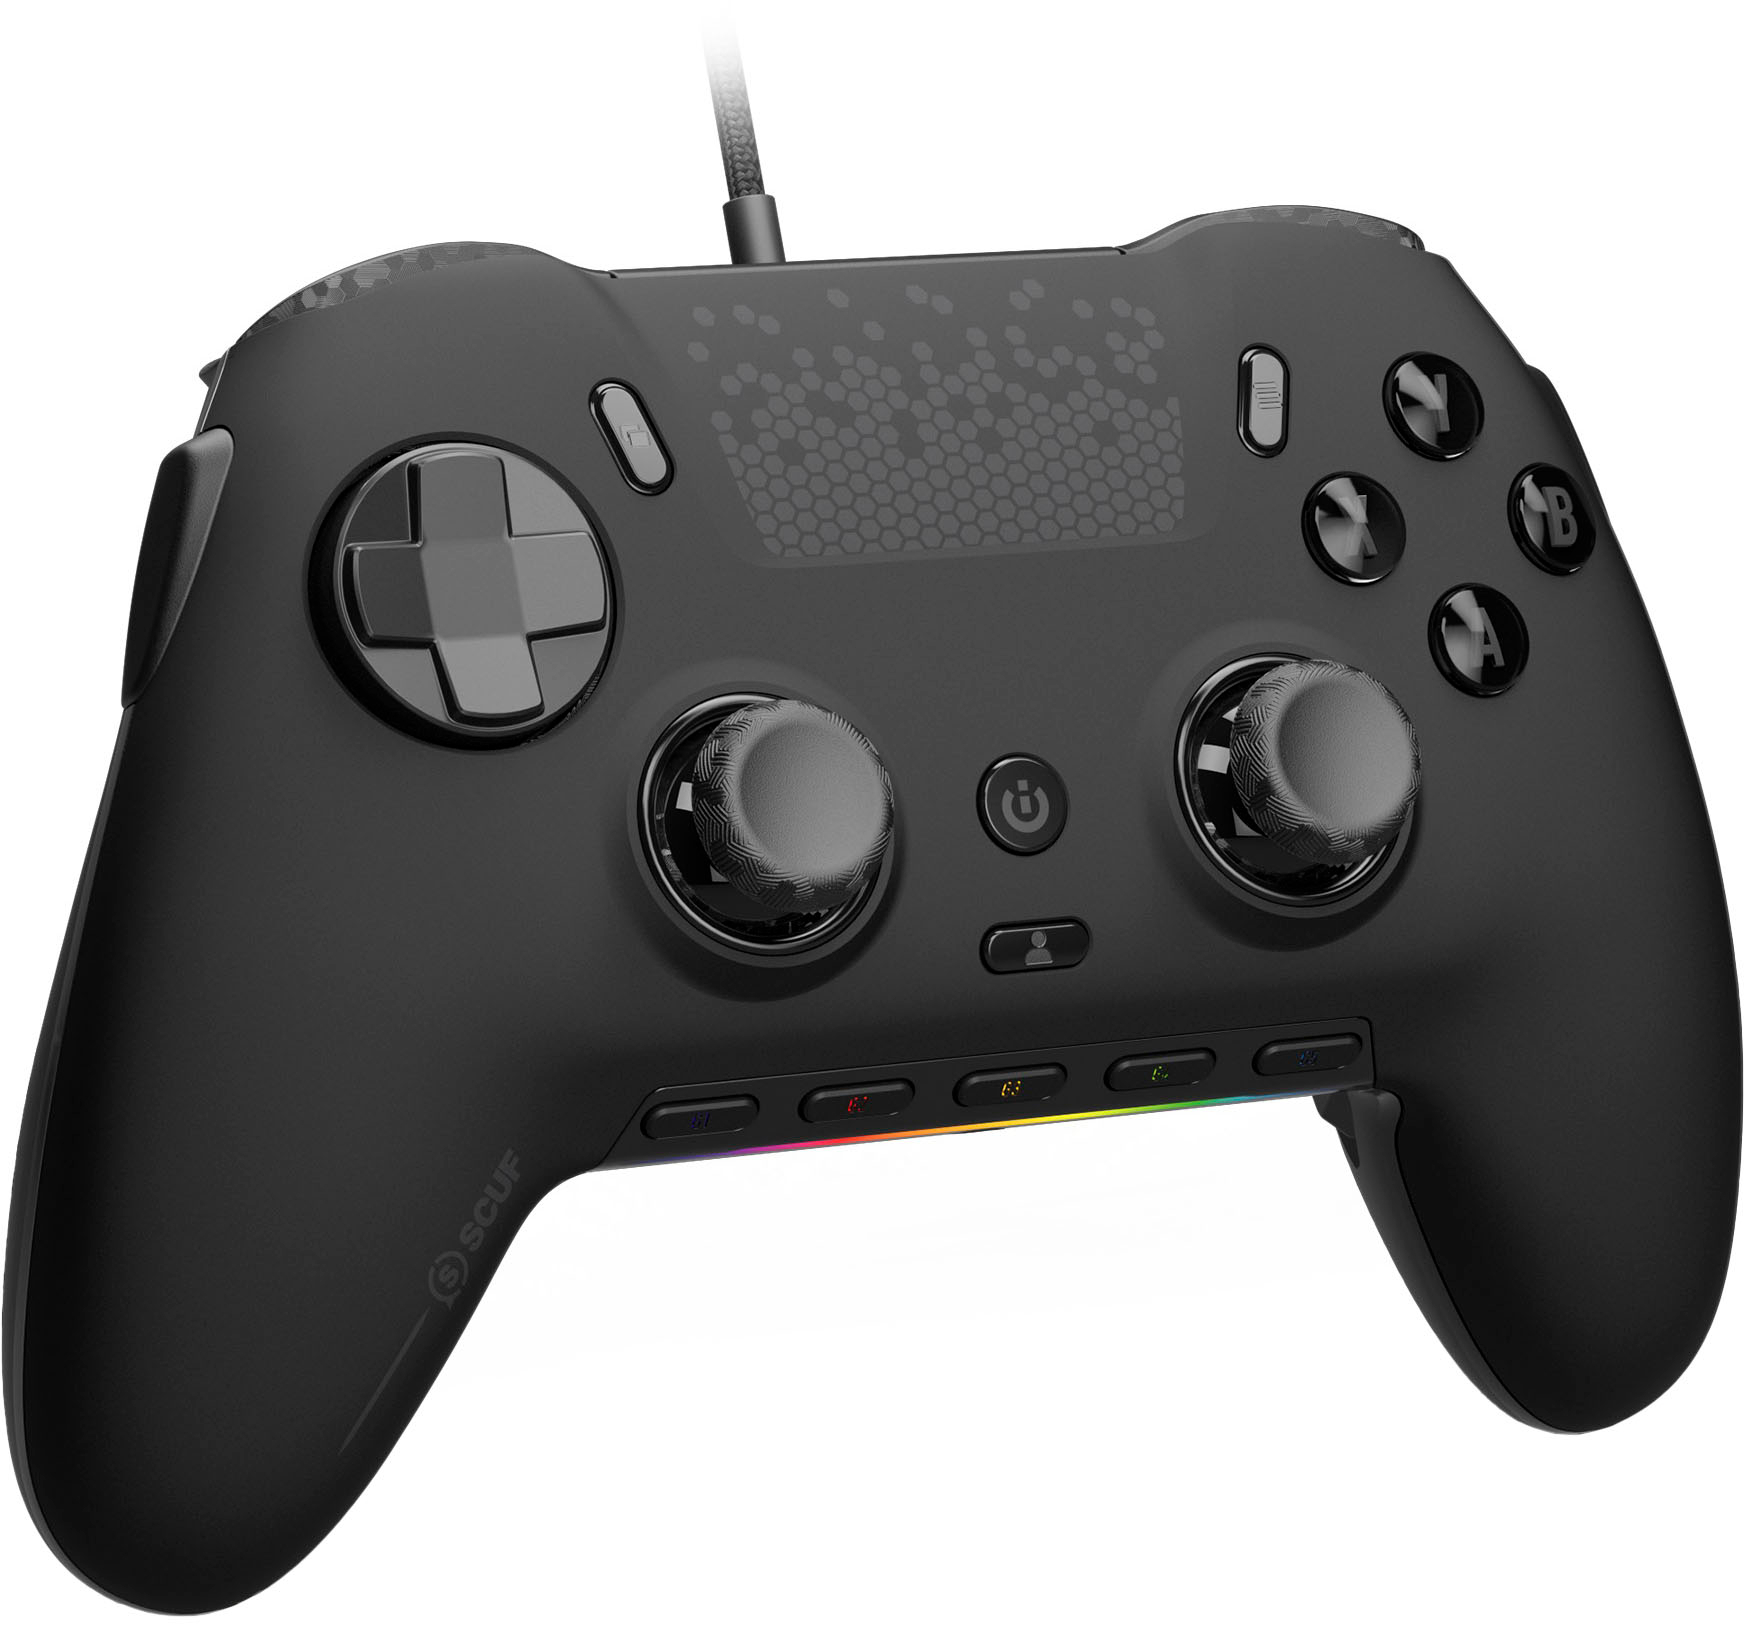 The Turtle Beach Stealth Ultra Controller has to be the most software  customizable controller out there. *30hr Battery life *Charging…